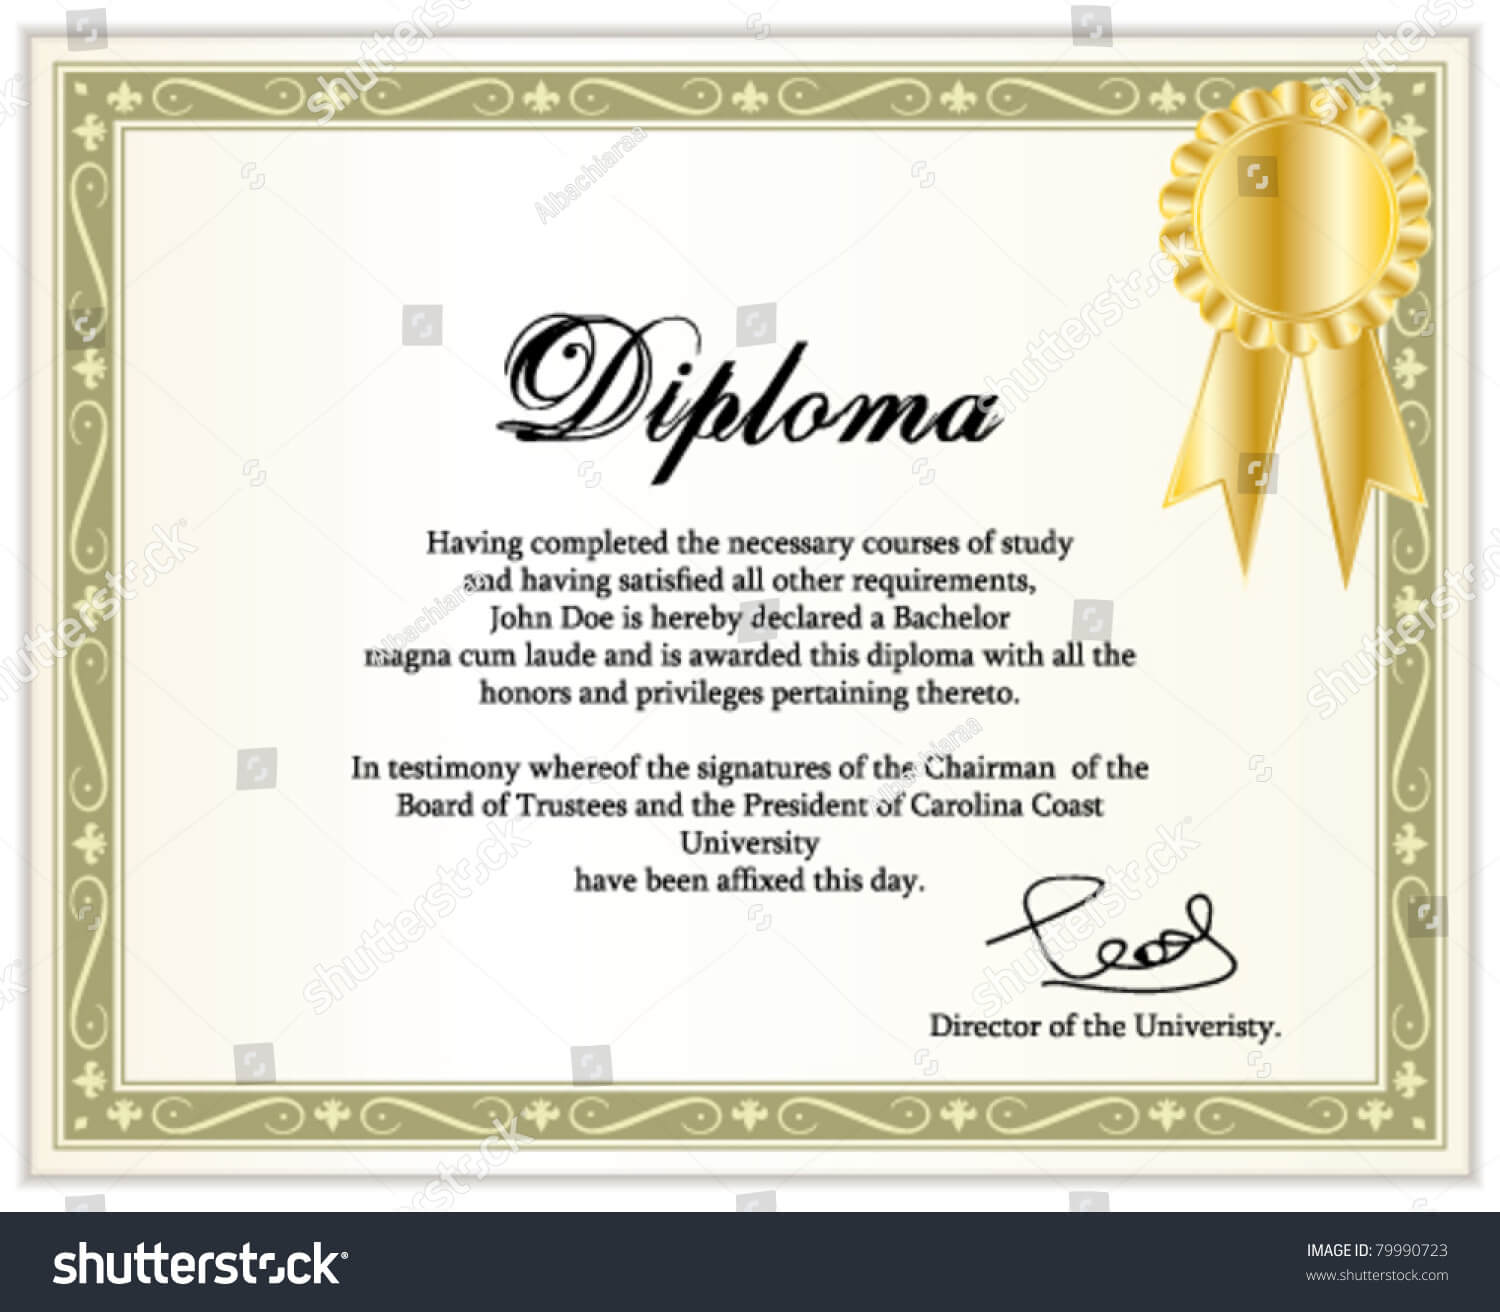 11 12 Phd Certificate Templates | Elainegalindo For Doctorate Certificate Template